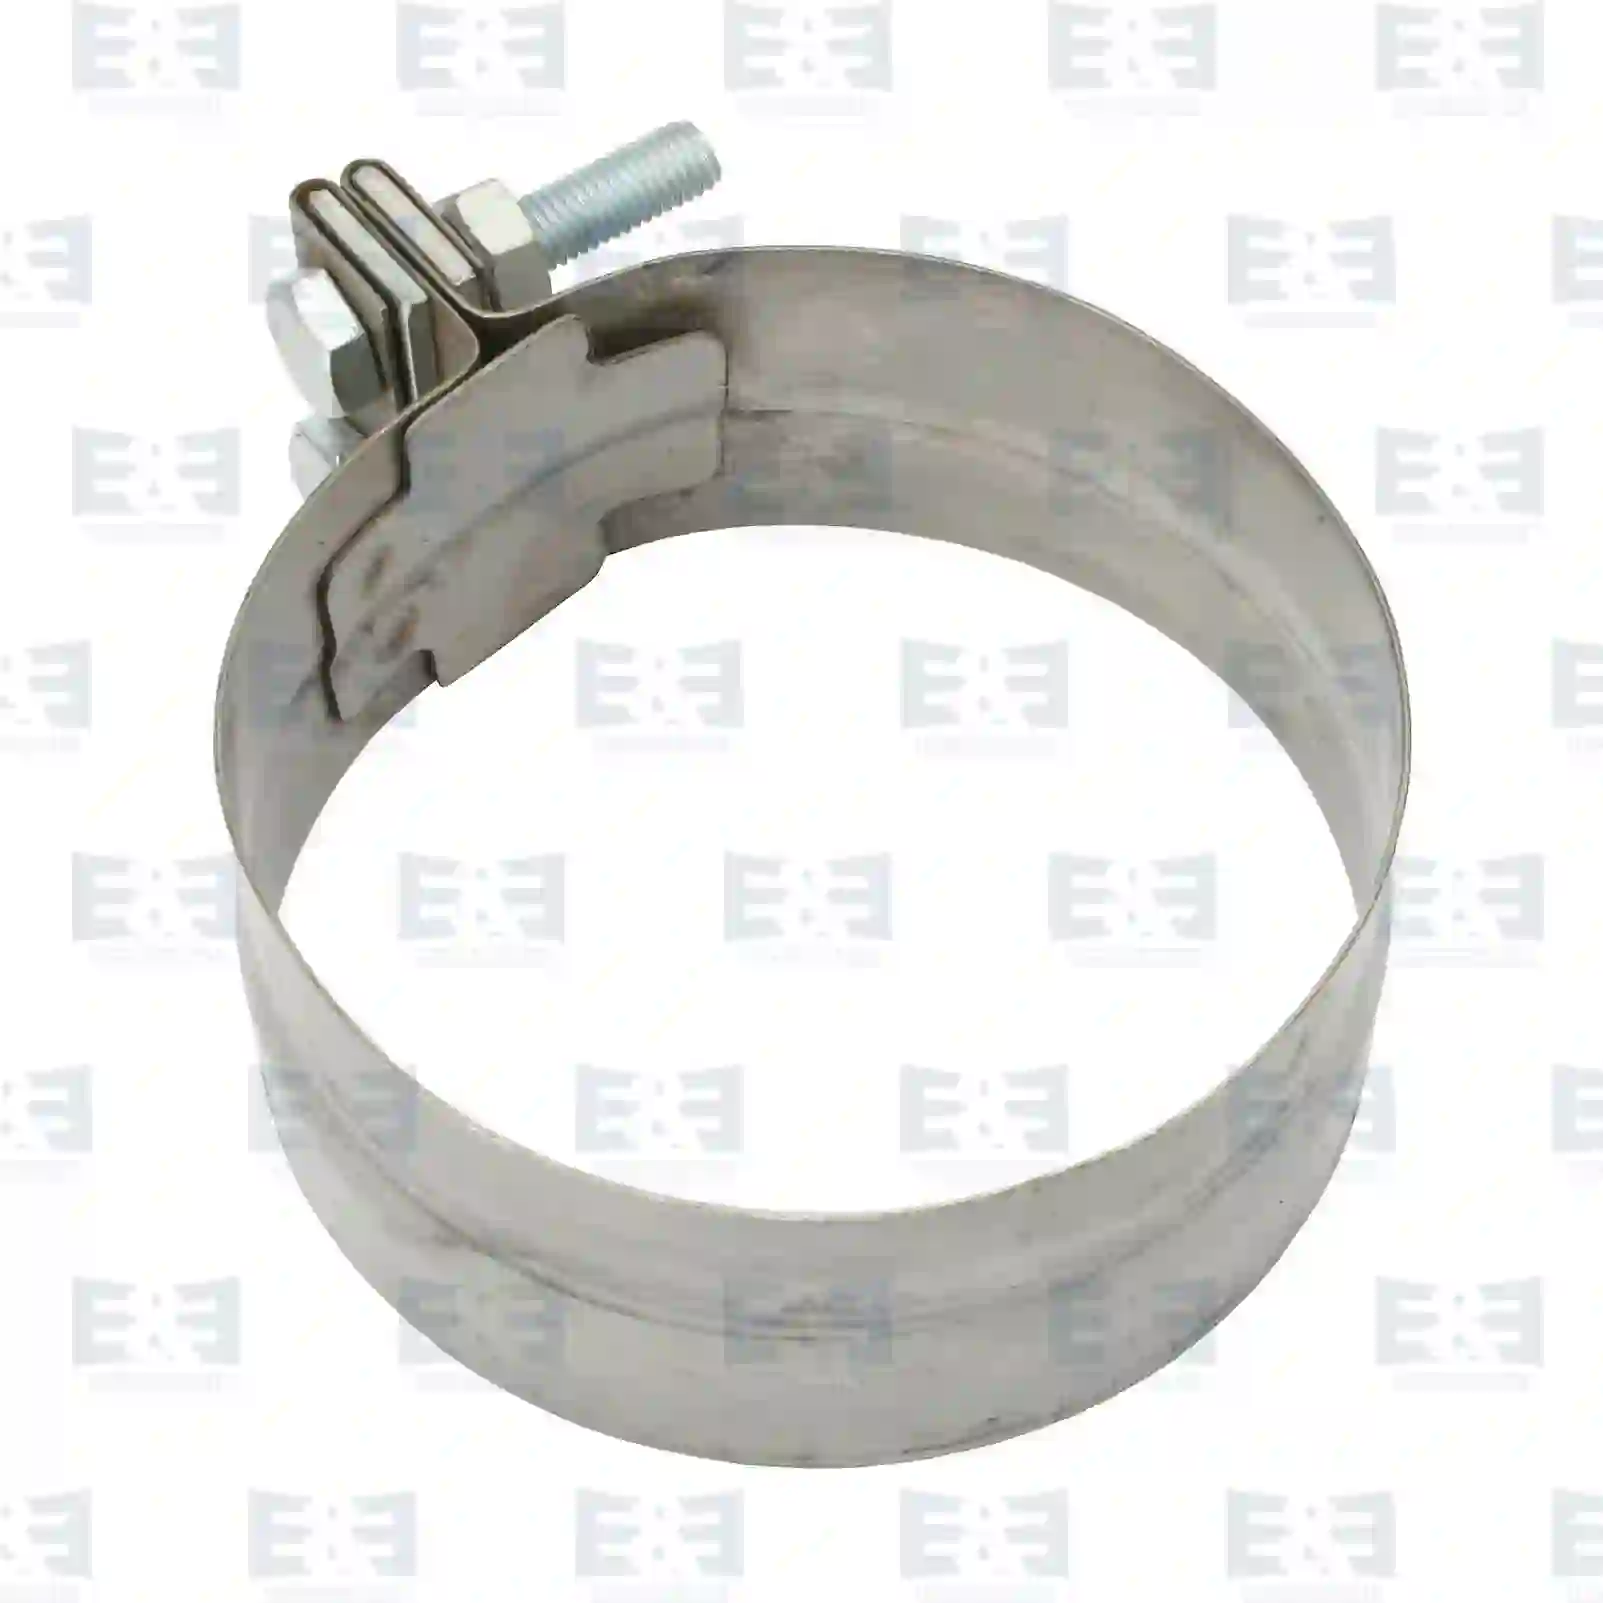 Clamp, stainless steel, 2E2204237, 1296068S, 97166049, 7420455908, 20383088S, 20455908, 8156156S, ZG10283-0008 ||  2E2204237 E&E Truck Spare Parts | Truck Spare Parts, Auotomotive Spare Parts Clamp, stainless steel, 2E2204237, 1296068S, 97166049, 7420455908, 20383088S, 20455908, 8156156S, ZG10283-0008 ||  2E2204237 E&E Truck Spare Parts | Truck Spare Parts, Auotomotive Spare Parts